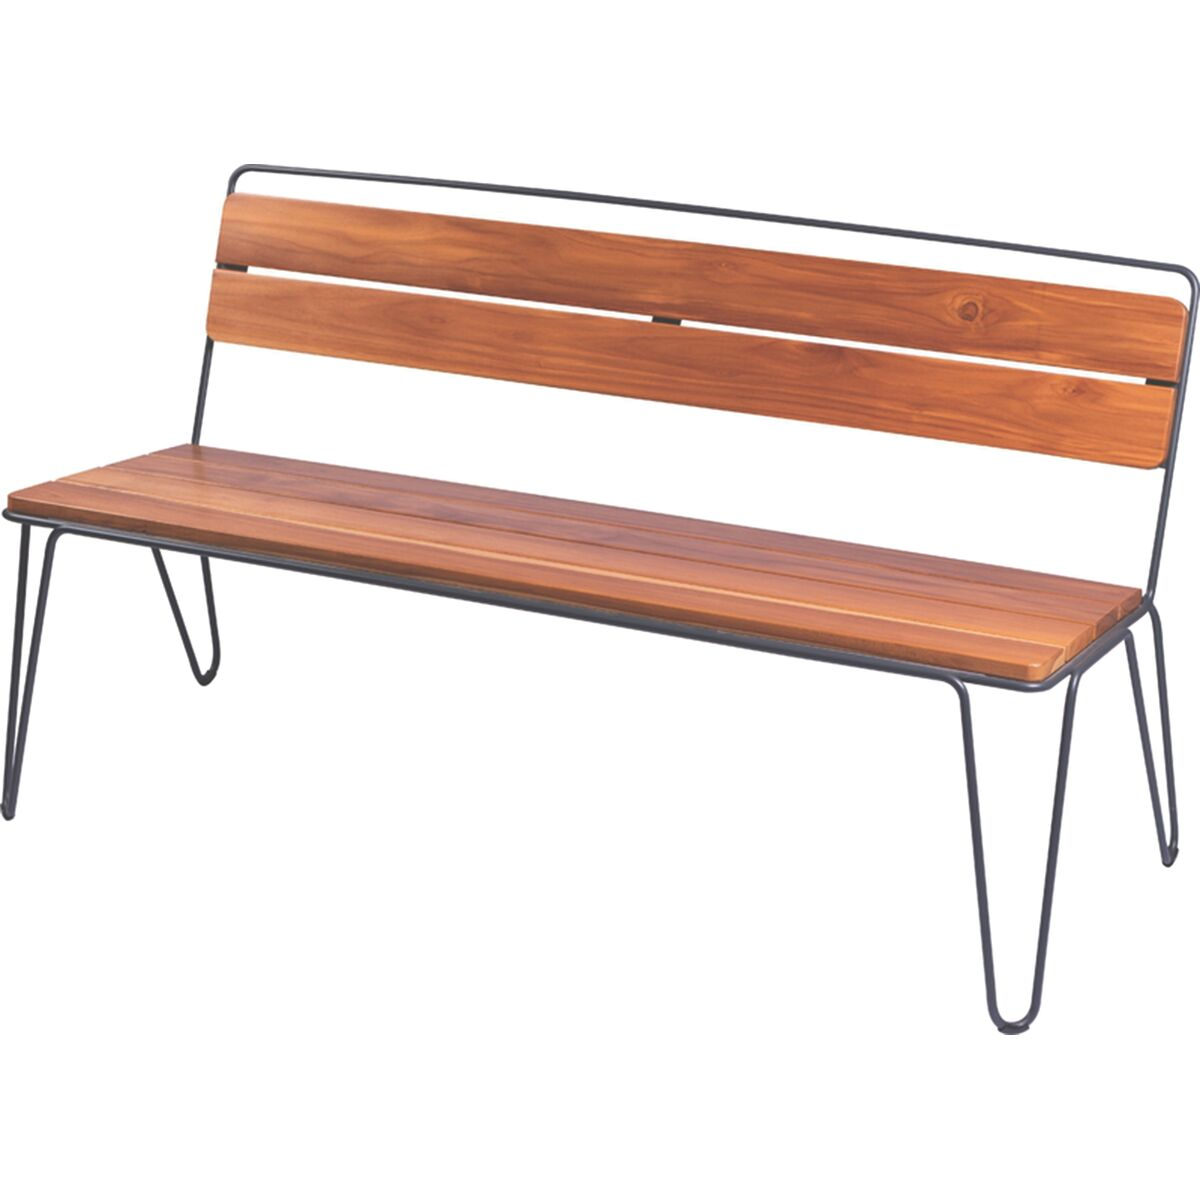 Tramontina Tarsila Bench with Backrest in Teak Wood with Carbon Steel Structure and Graphite Ecoclear Finish